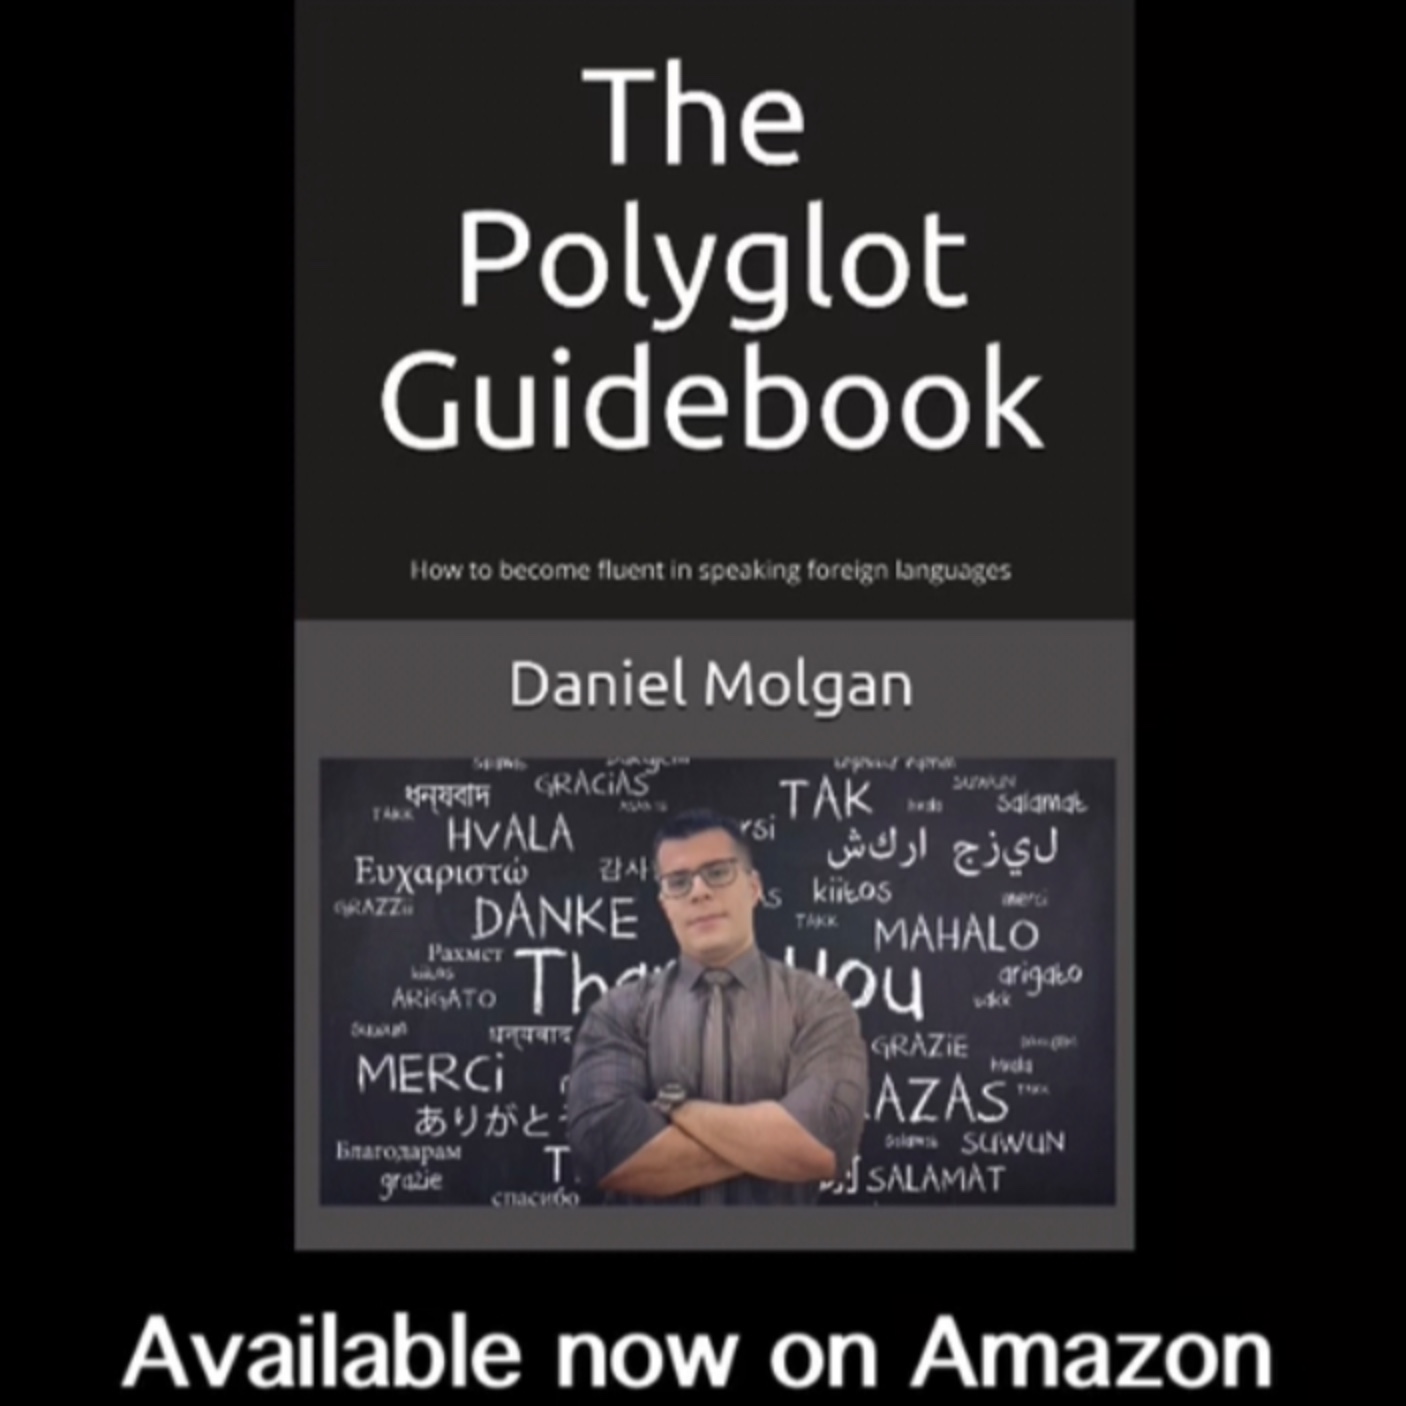 #166 - Introduction to the polyglot guidebook